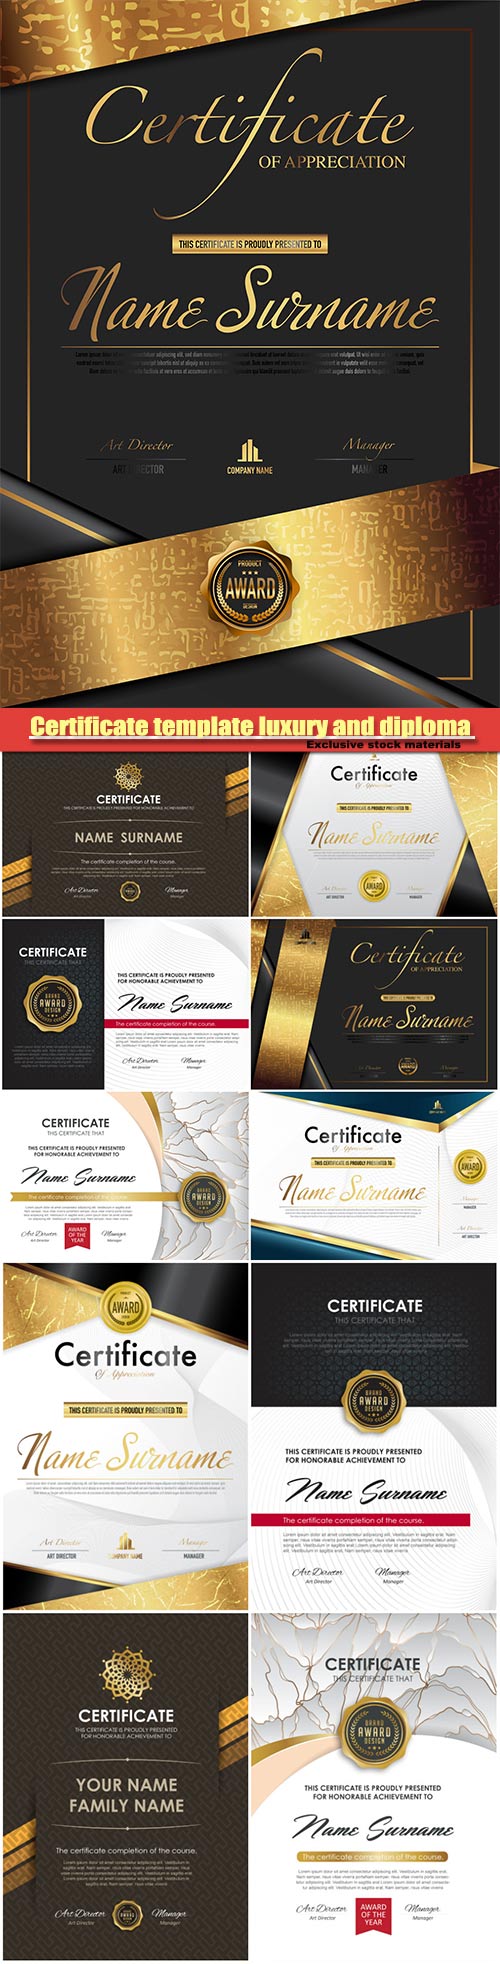 Certificate template luxury and diploma vector illustration